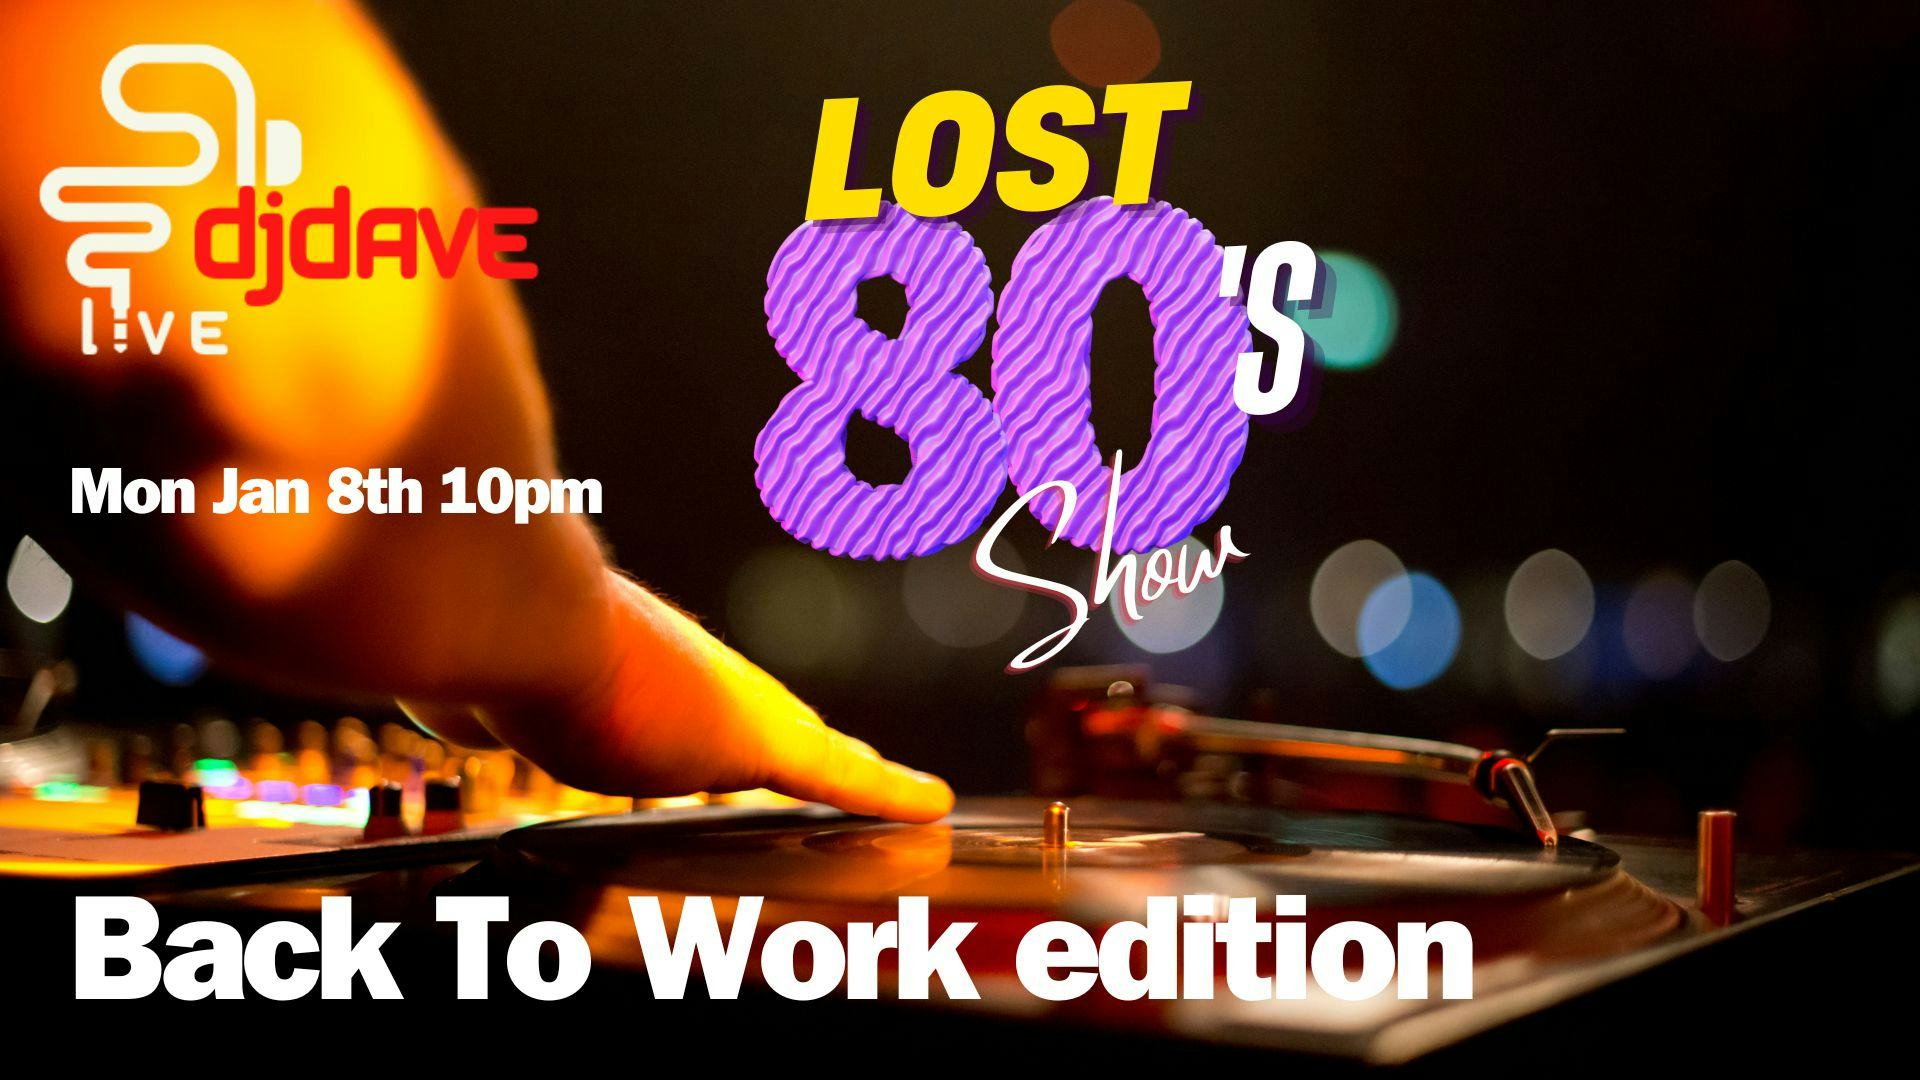 The Lost 80's Show Monday Jan 8th Edition - Back to Work!